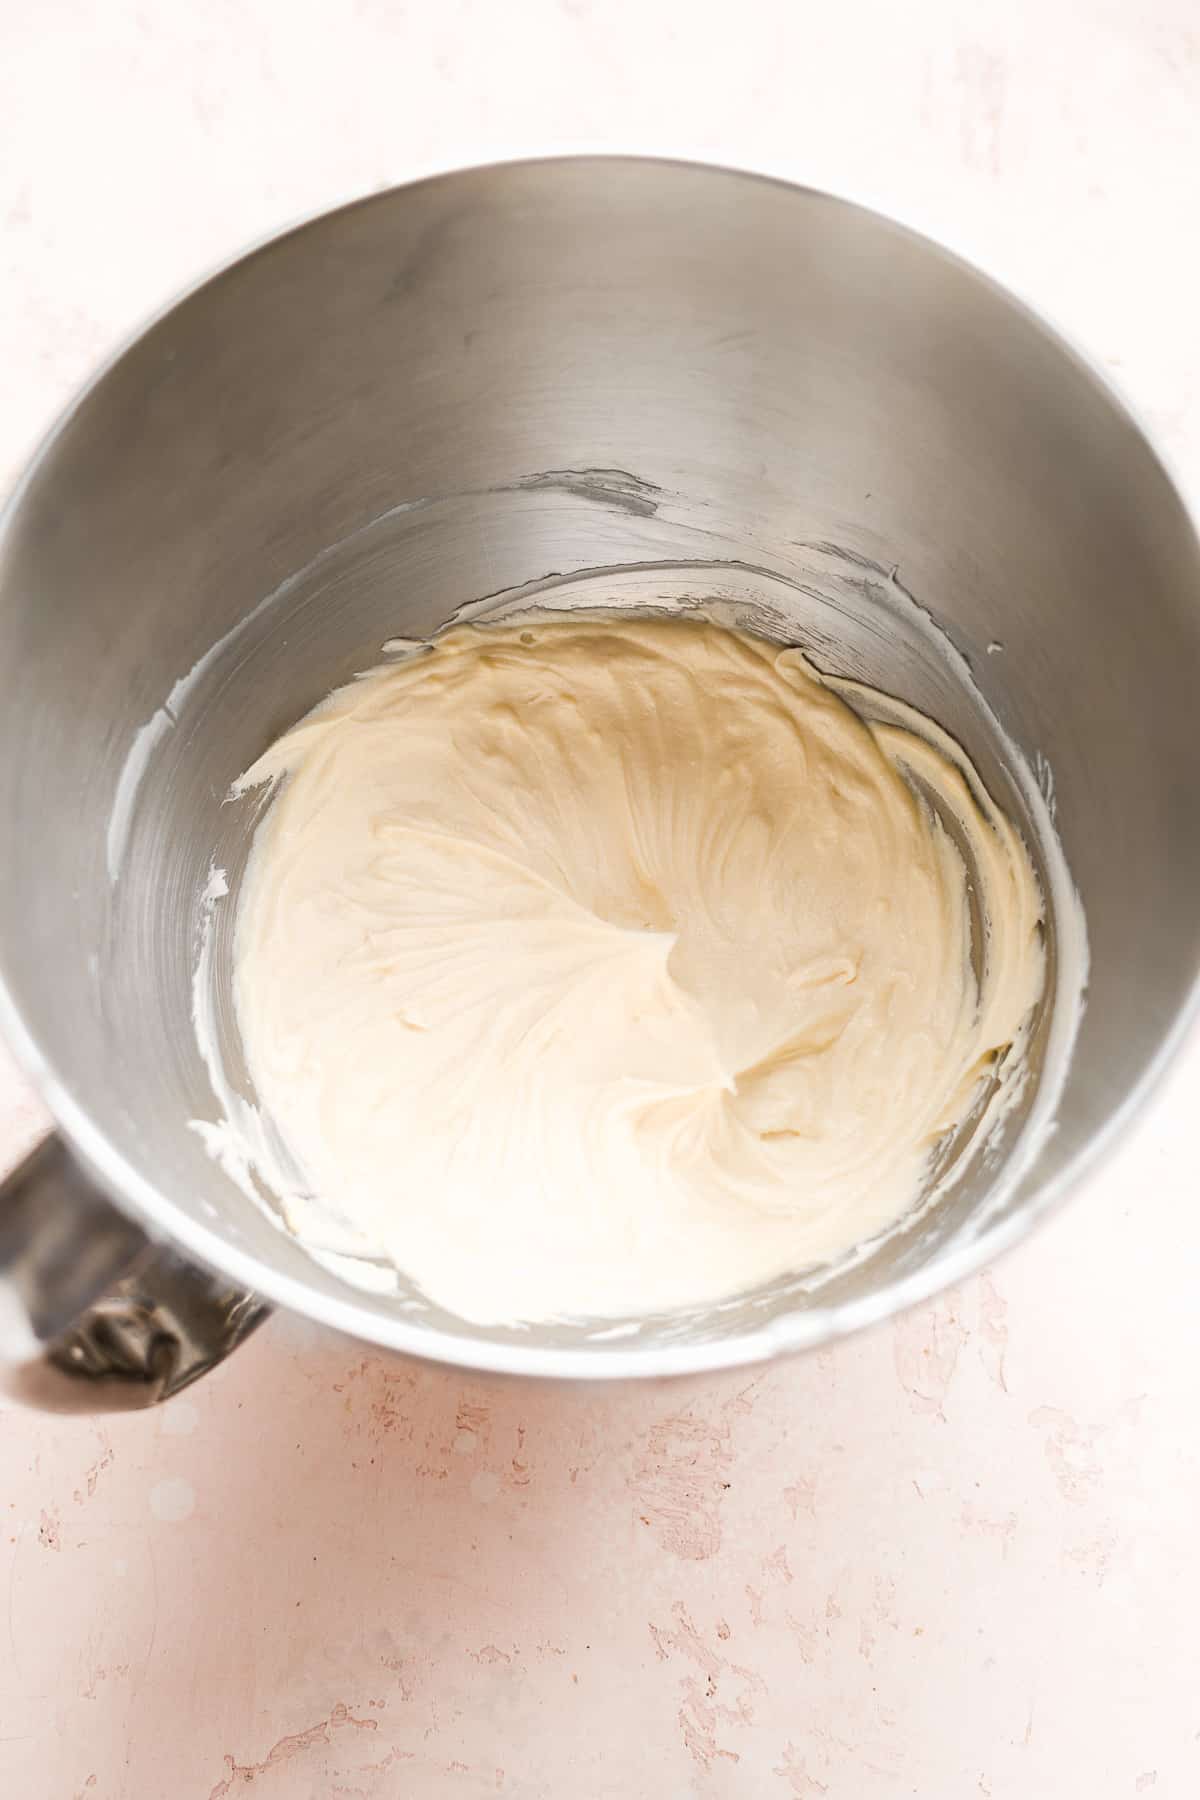 Cream cheese whipped inside a metal mixing bowl.